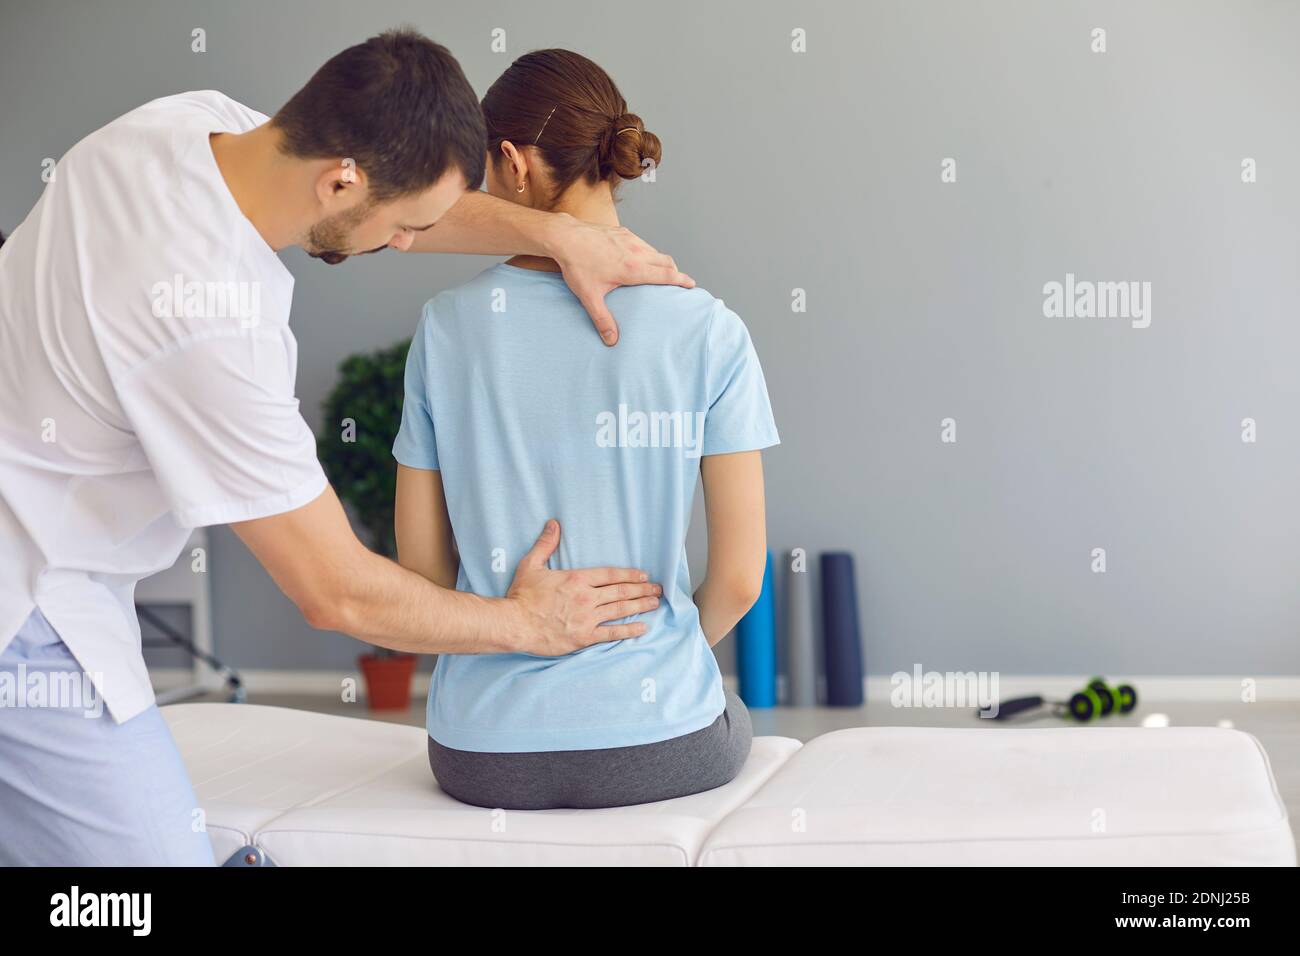 Professional osteopath fixing woman patients back muscles during rehabilitation theapy Stock Photo